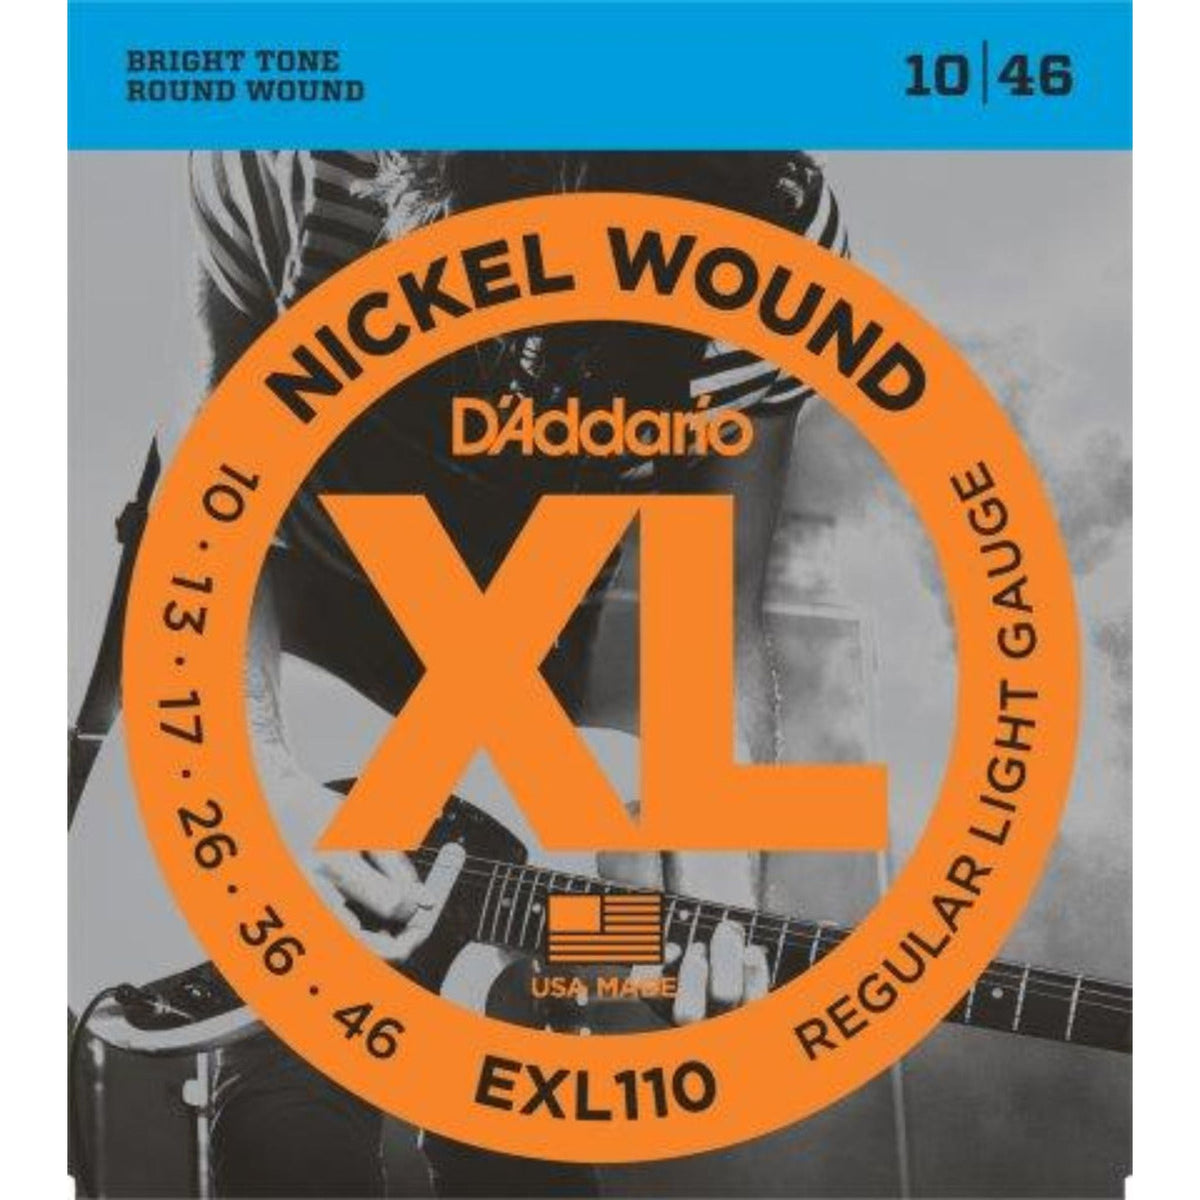 EXL110, D&#39;Addario&#39;s best selling set, offers the ideal combination of tone, flexibility and long life. The standard for most electric guitars.